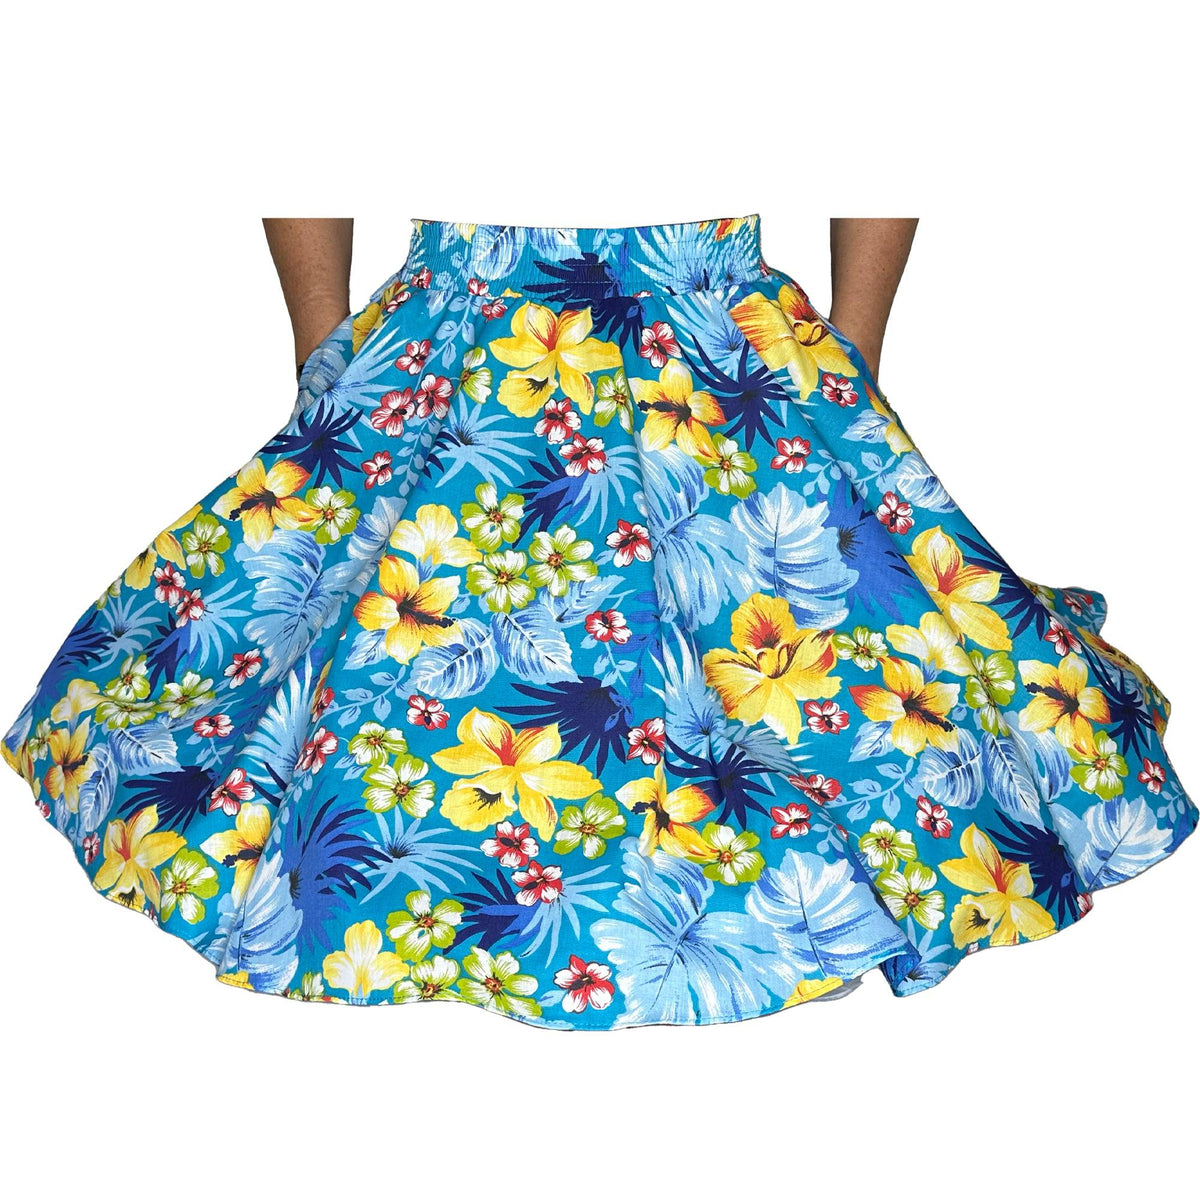 A woman wearing a Tropical Hawaiian Square Dance Skirt from Square Up Fashions.